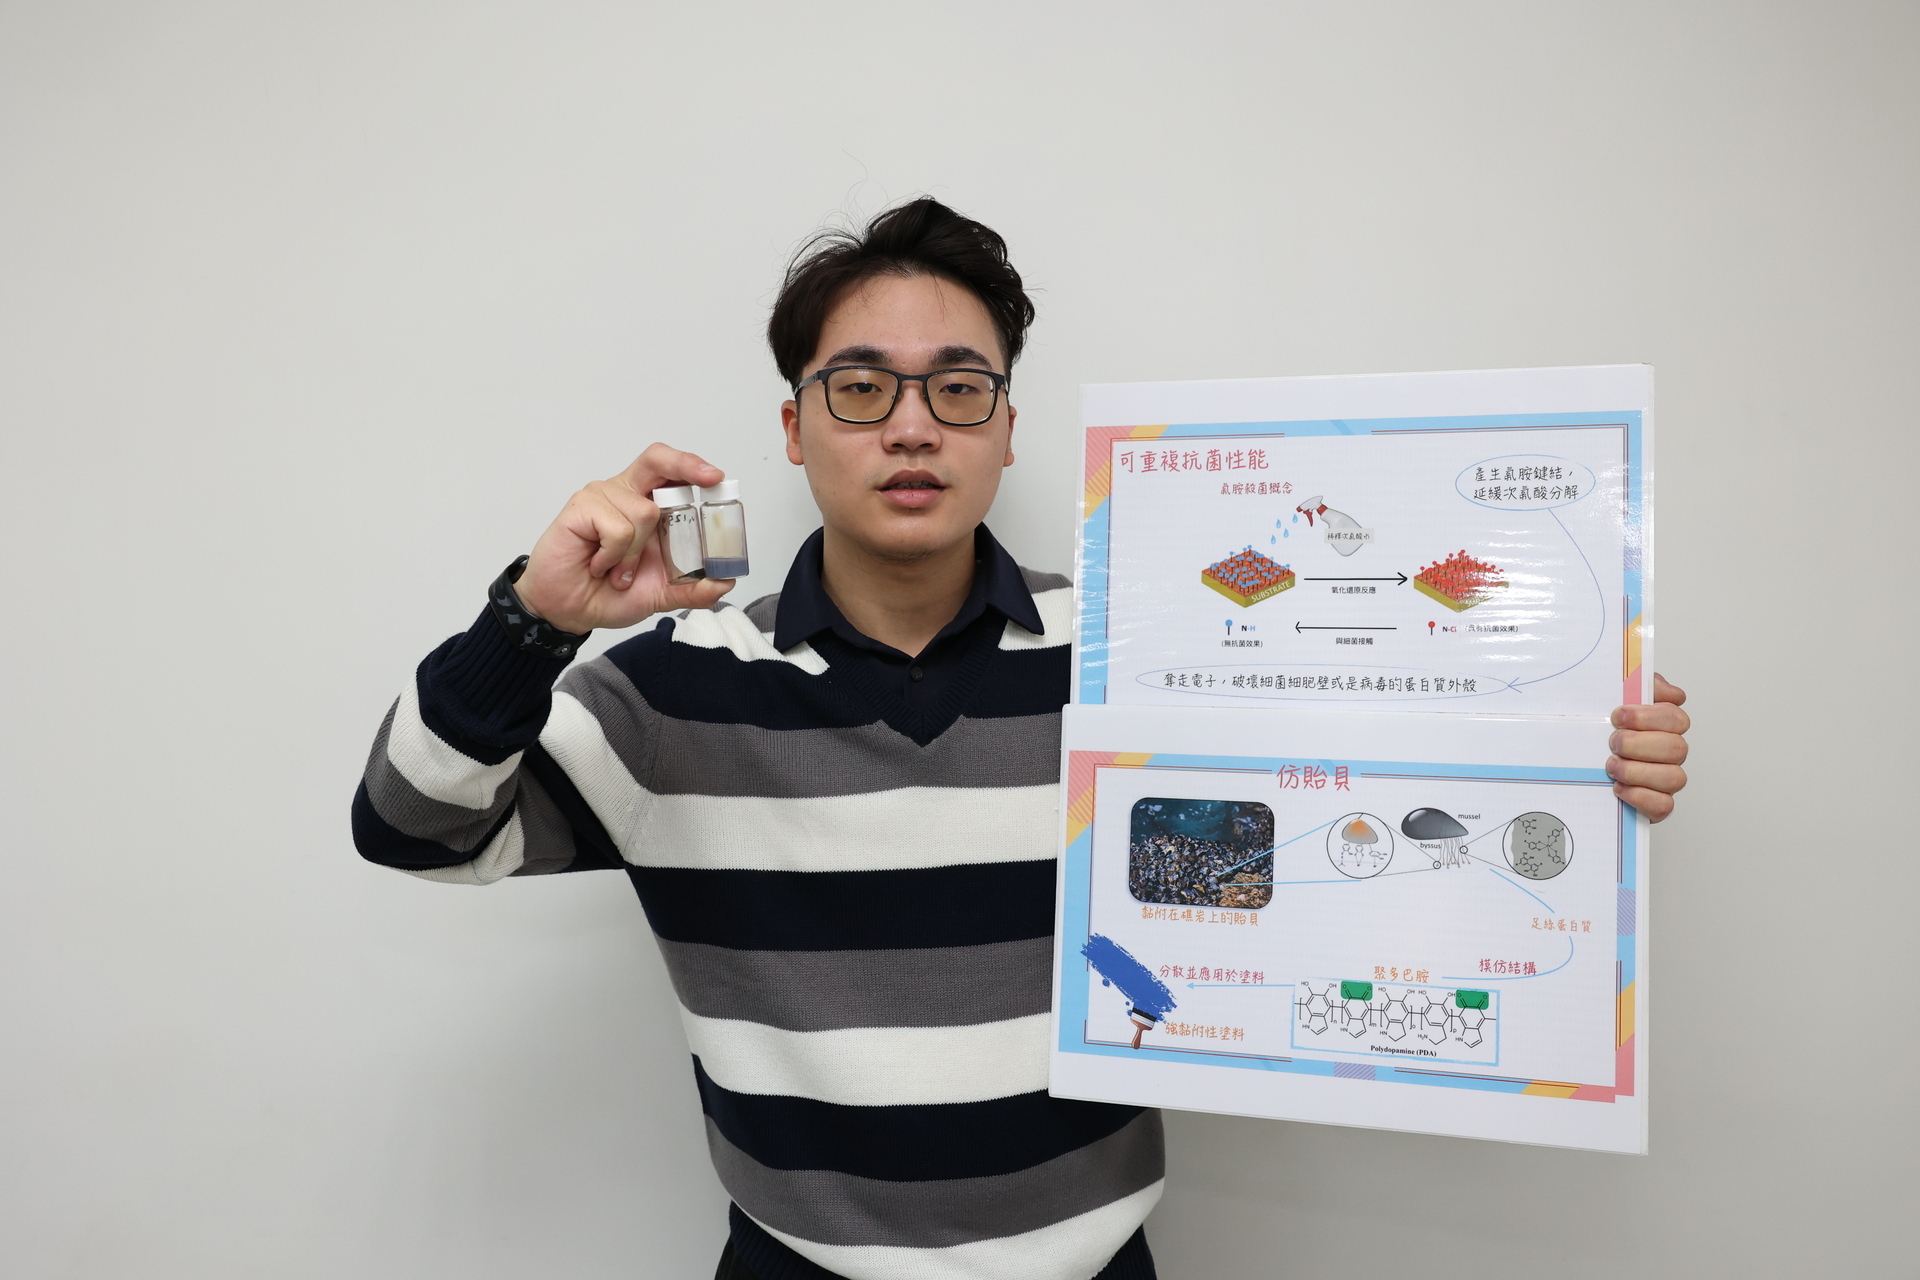 NUK's Department of Chemical and Materials Engineering, under the guidance of Distinguished Professor Yi-Chang Chung, guided three undergraduate students, Duan Huawen, Chung Bingxun, and Chen Xianglin, in developing "Mussel-inspired renewable antibacterial coating." 005